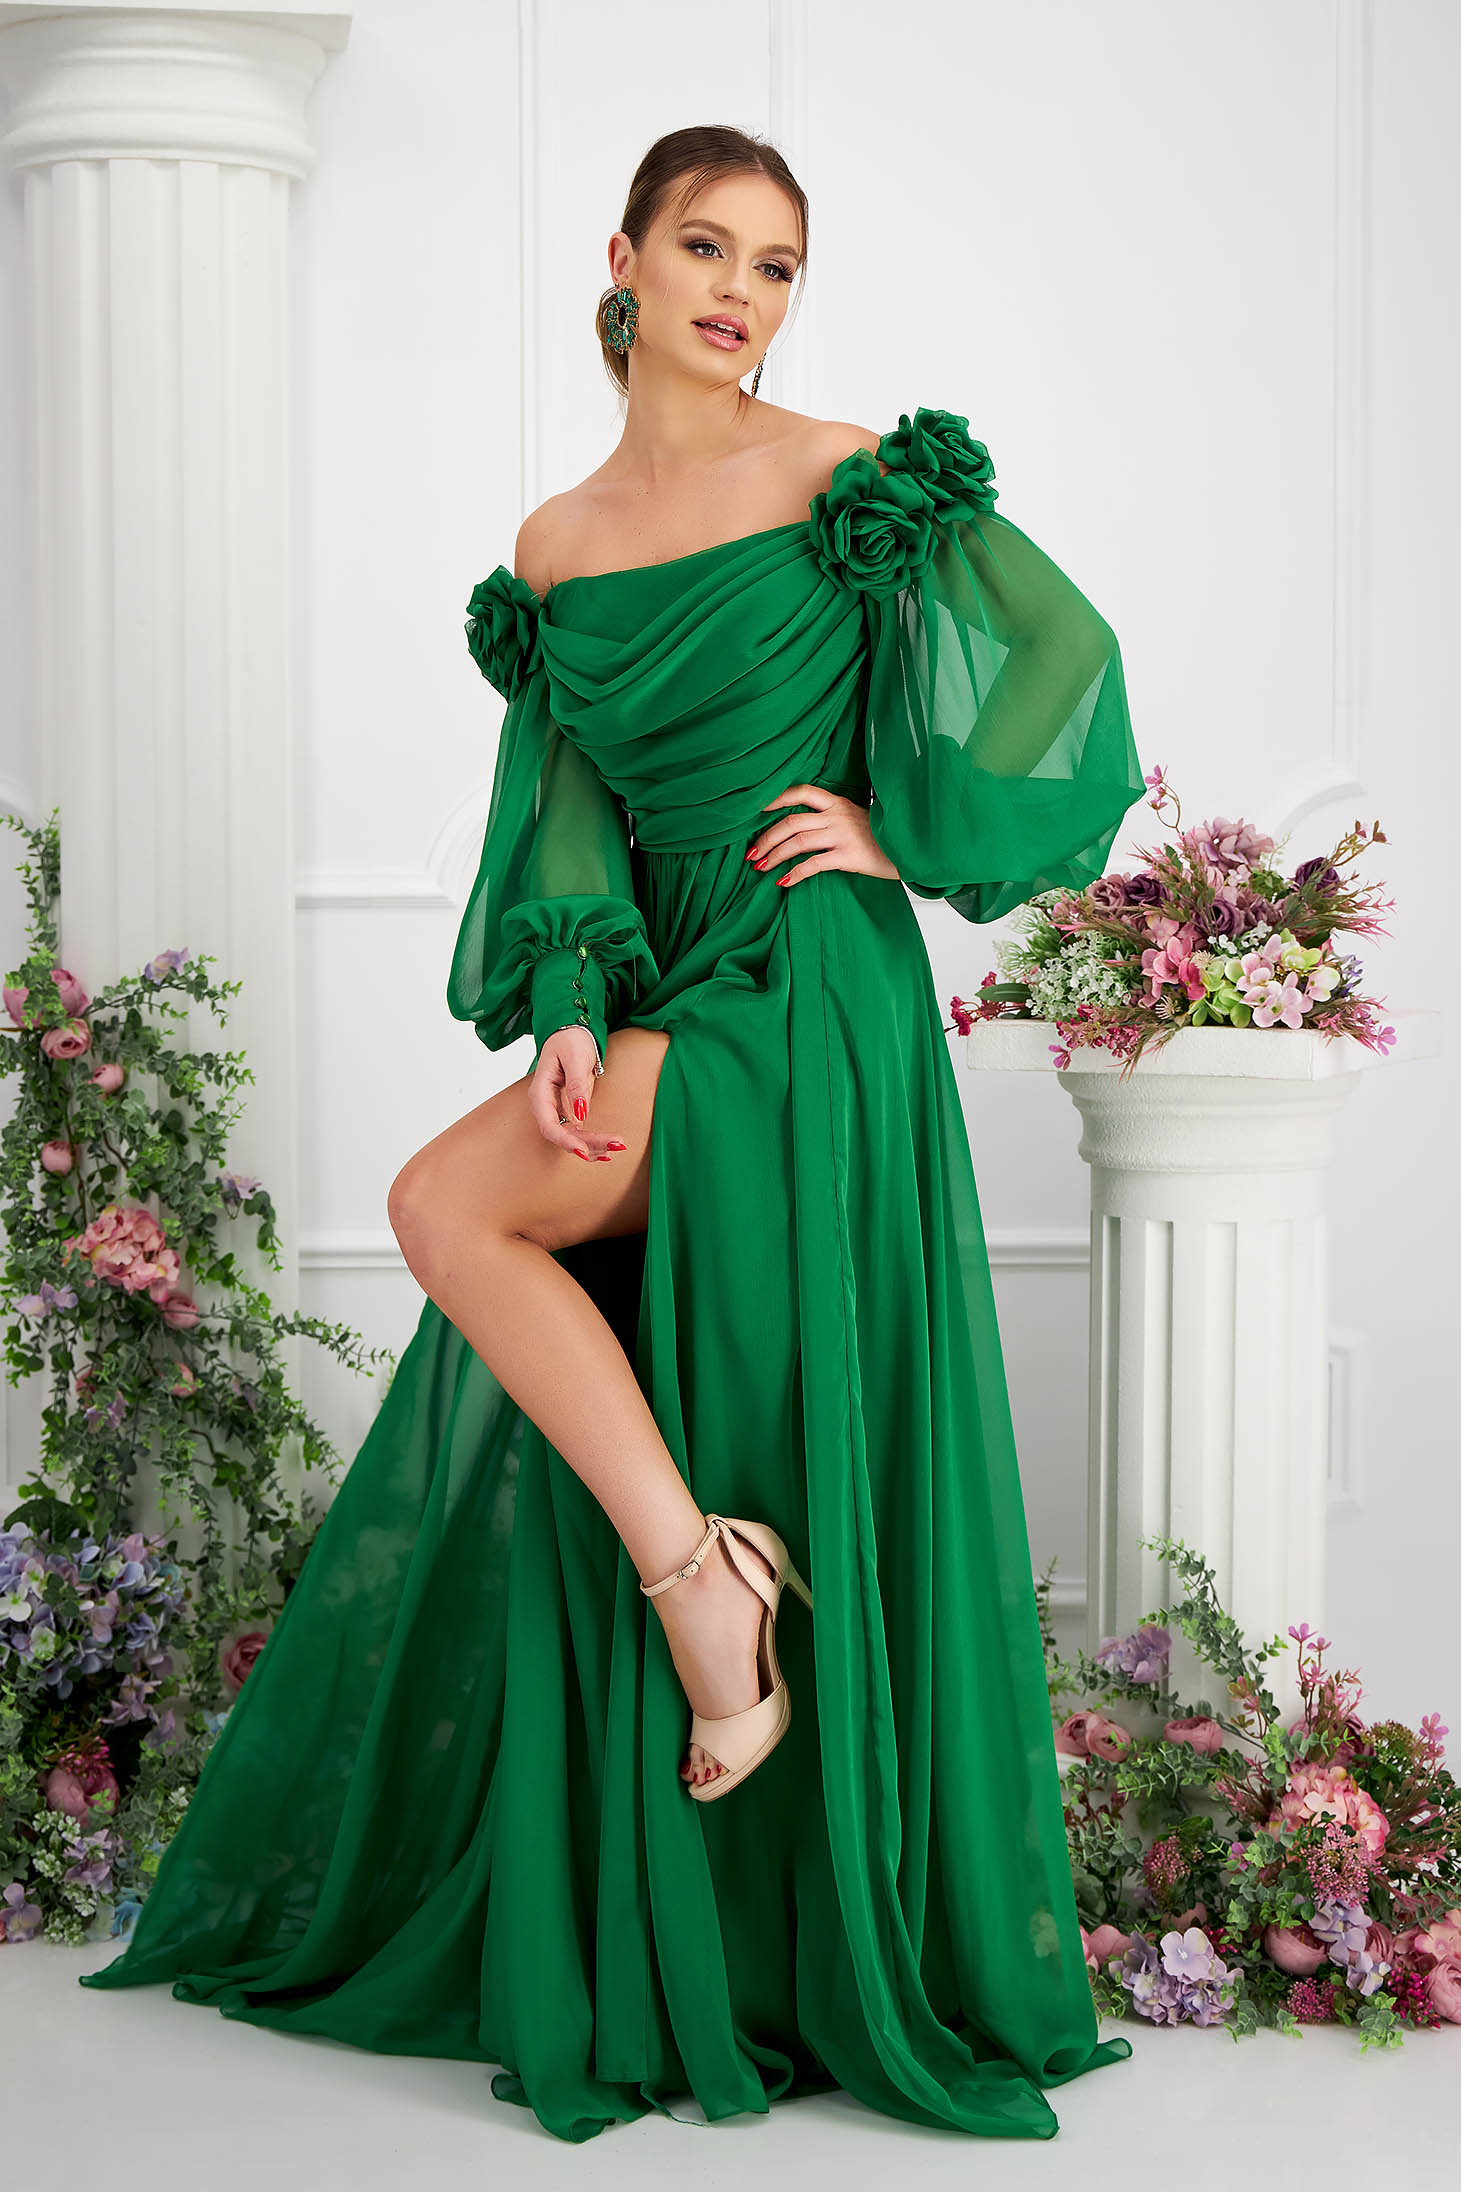 Green dress from veil fabric from satin fabric texture long cloche naked shoulders with raised flowers